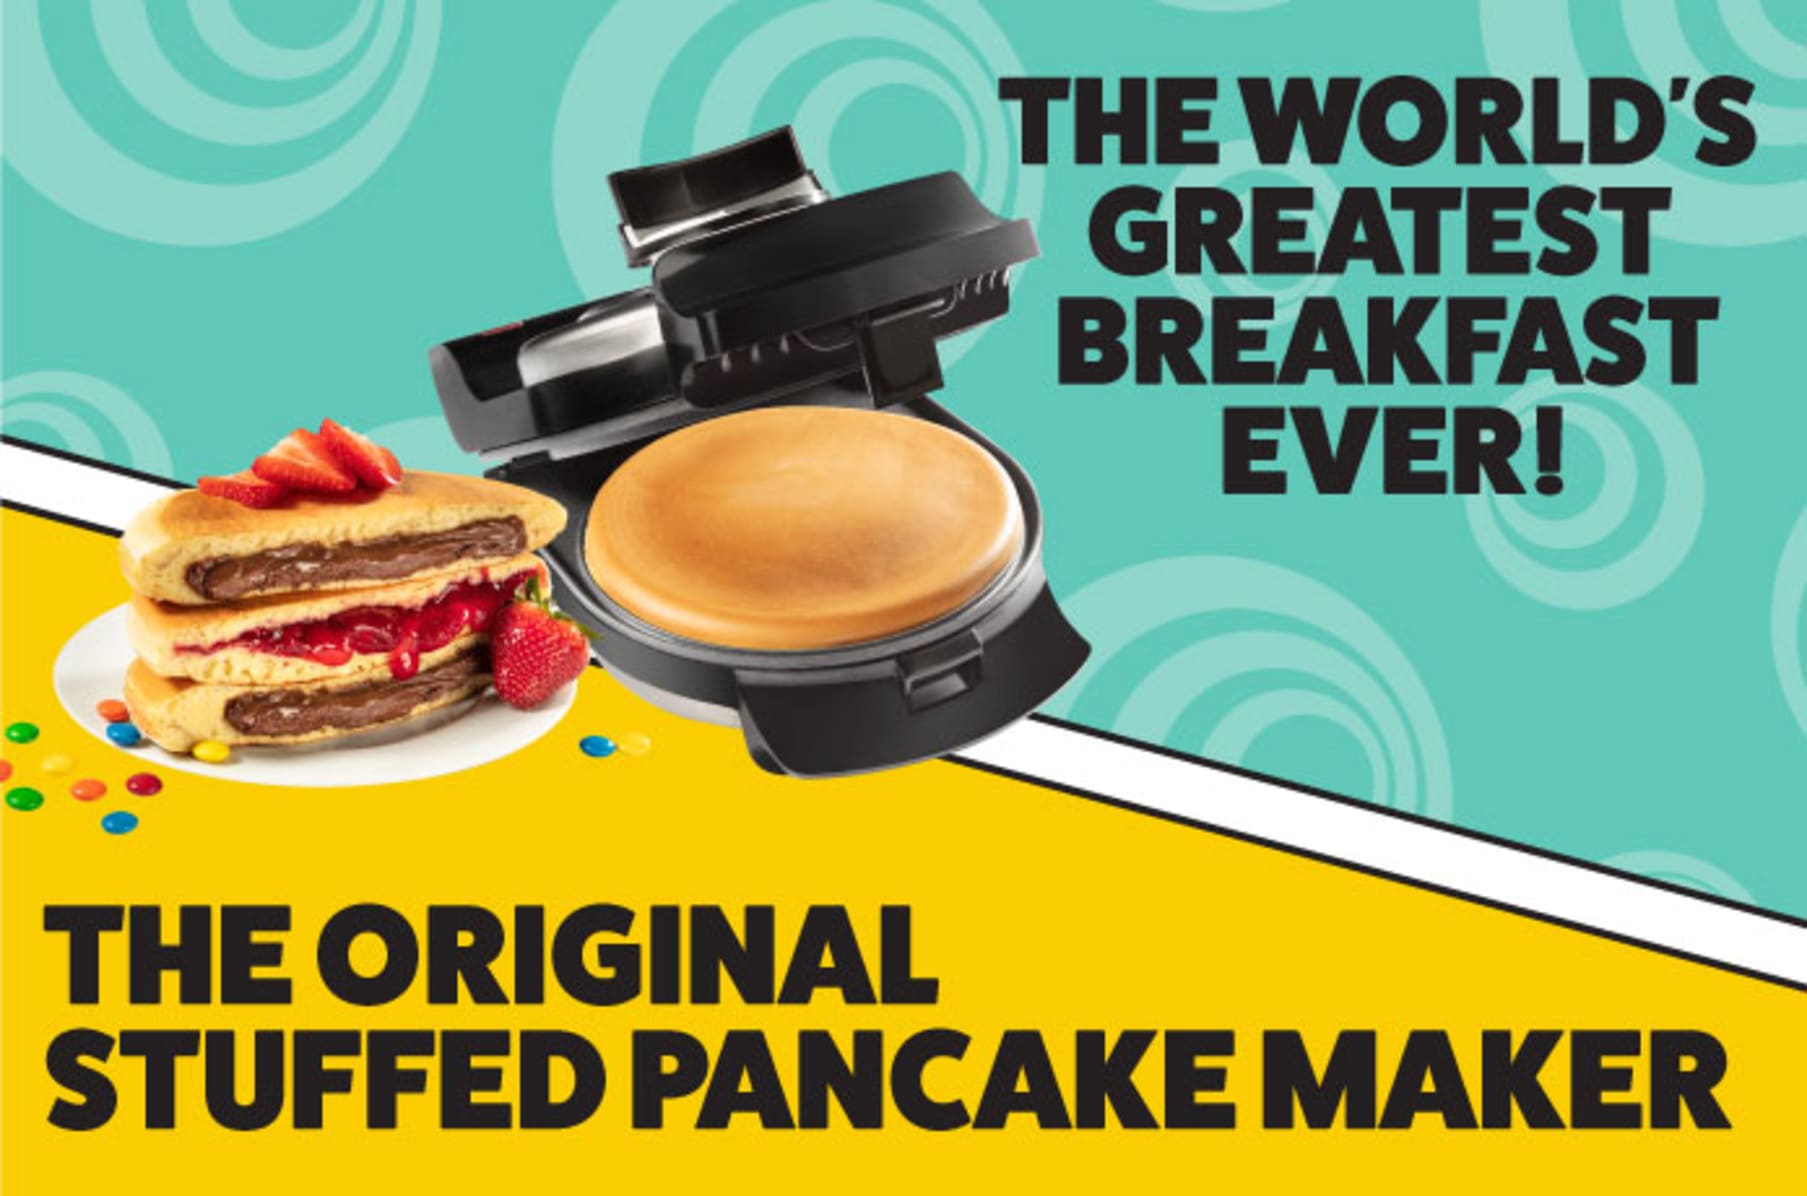 Stuffed Pancake Maker- Make a GIANT Stuffed Waffle or Pan Cake in Minutes-  Add Fillings for Delicious Breakfast or Dessert Treat, Electric, Nonstick